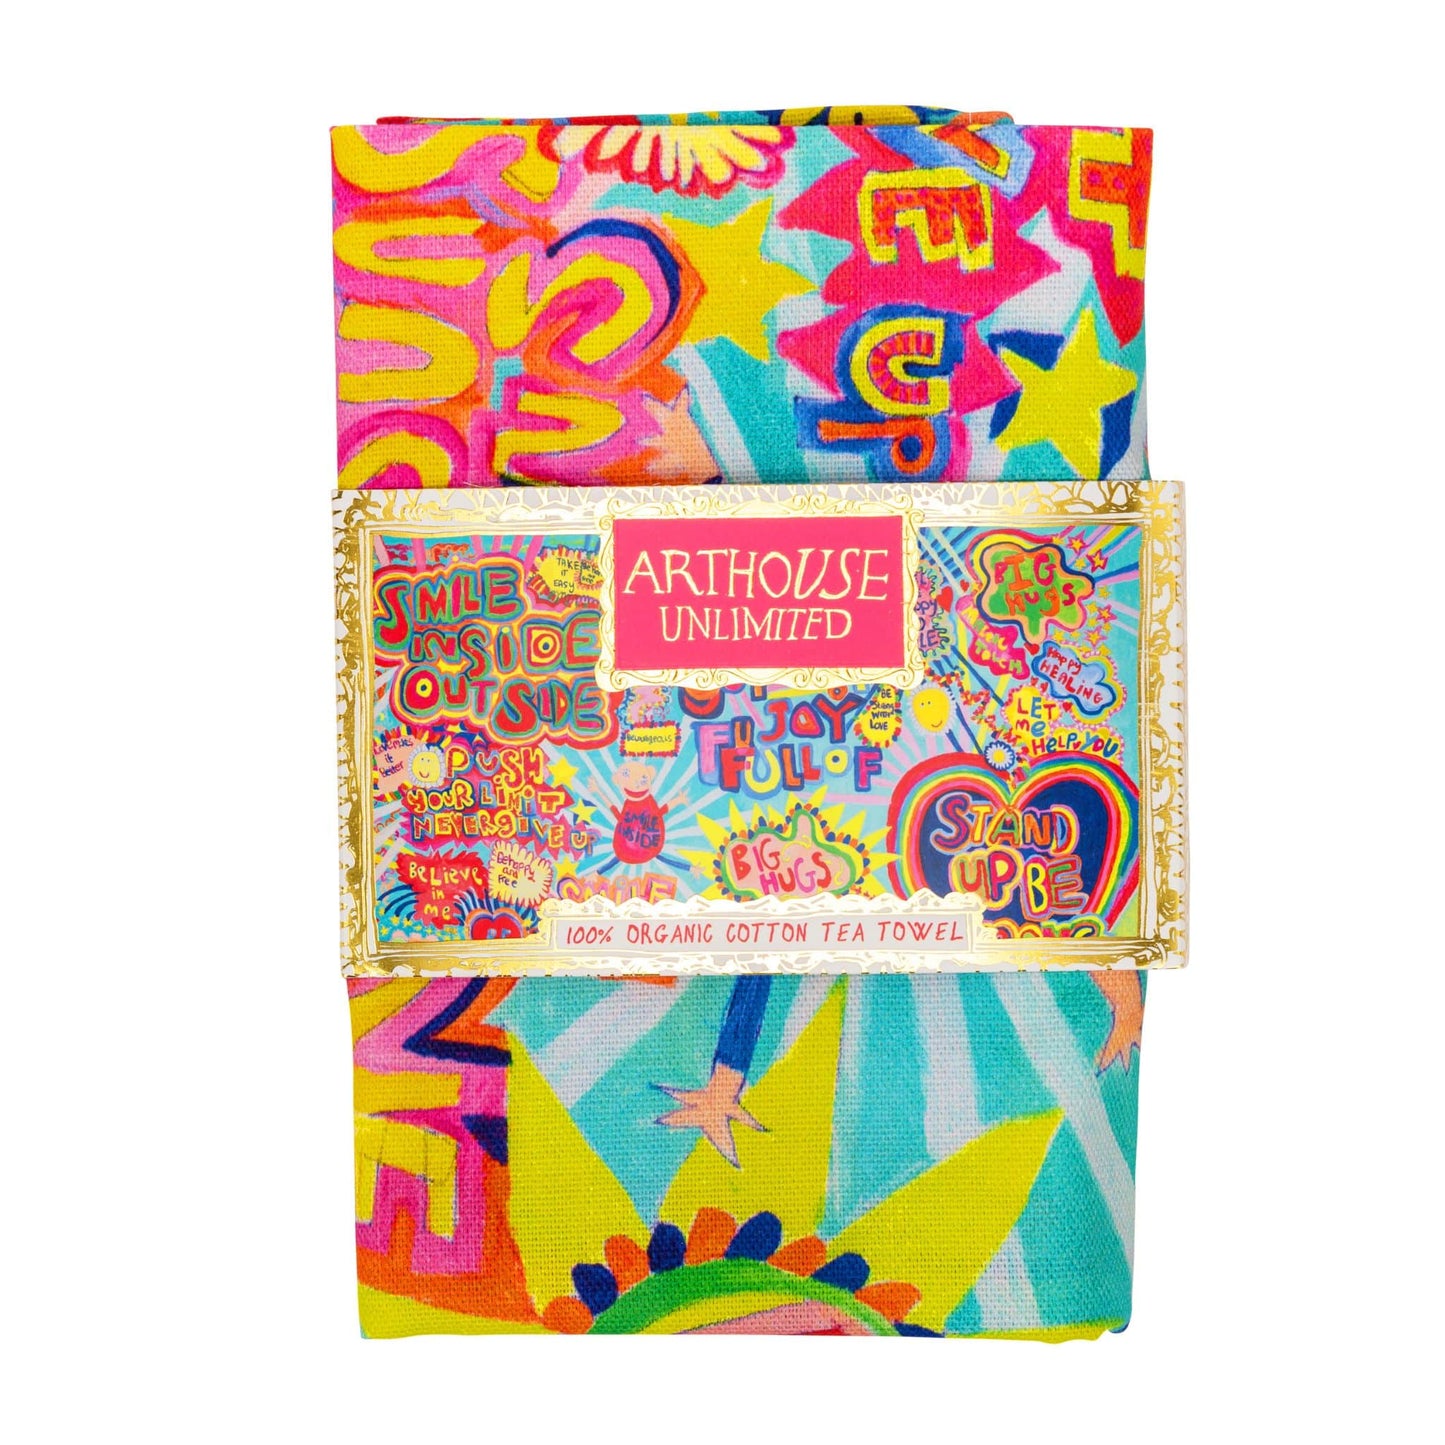 Full of Joy  Organic Cotton Tea Towel in packaging from ARTHOUSE Unlimited